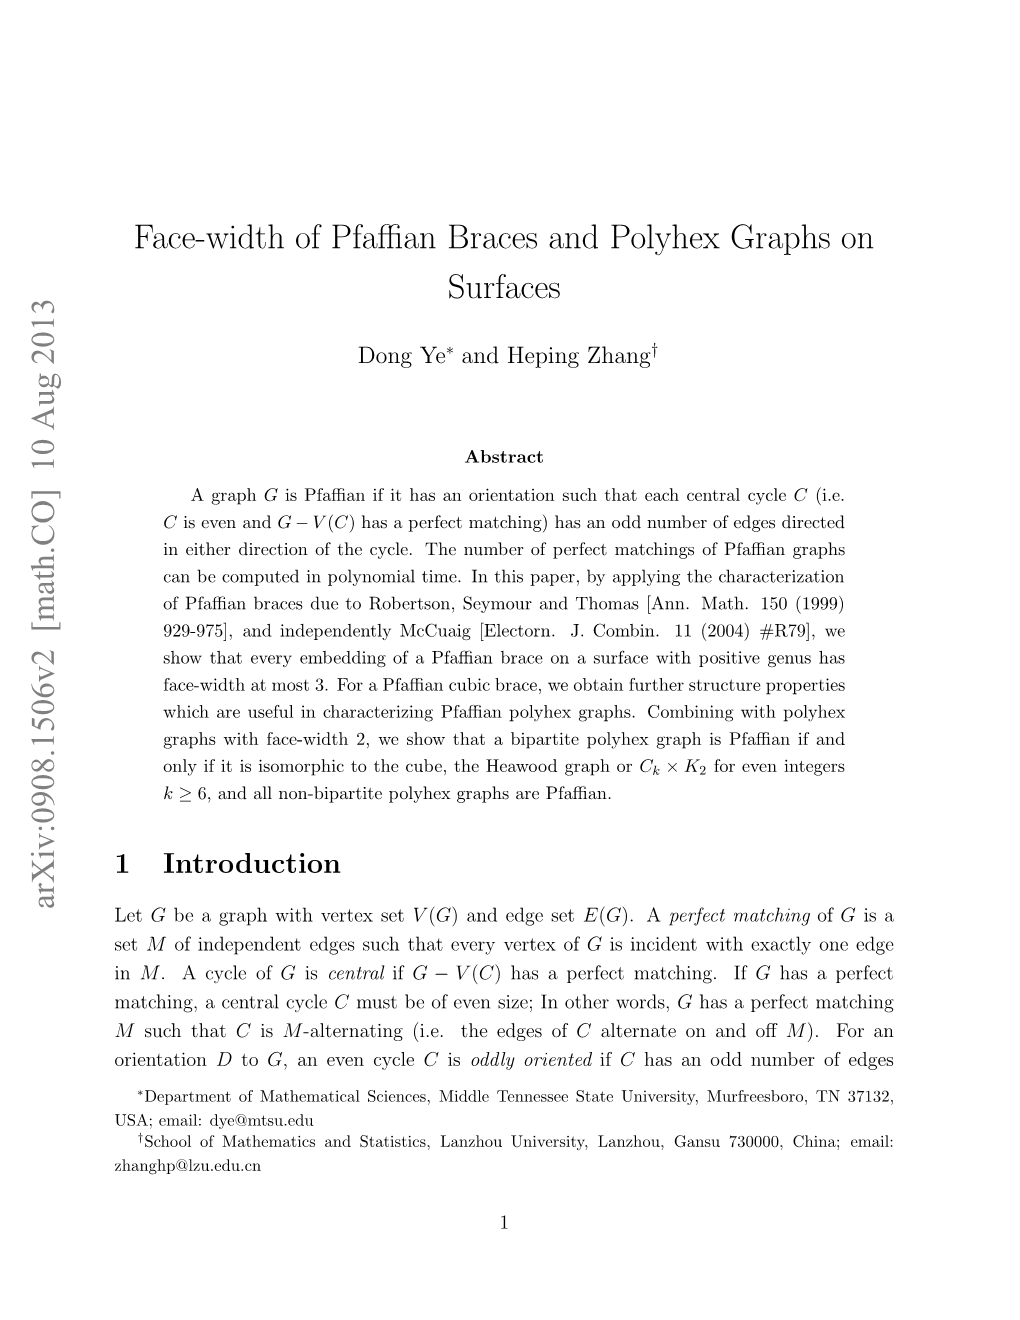 Face-Width of Pfaffian Braces and Polyhex Graphs on Surfaces